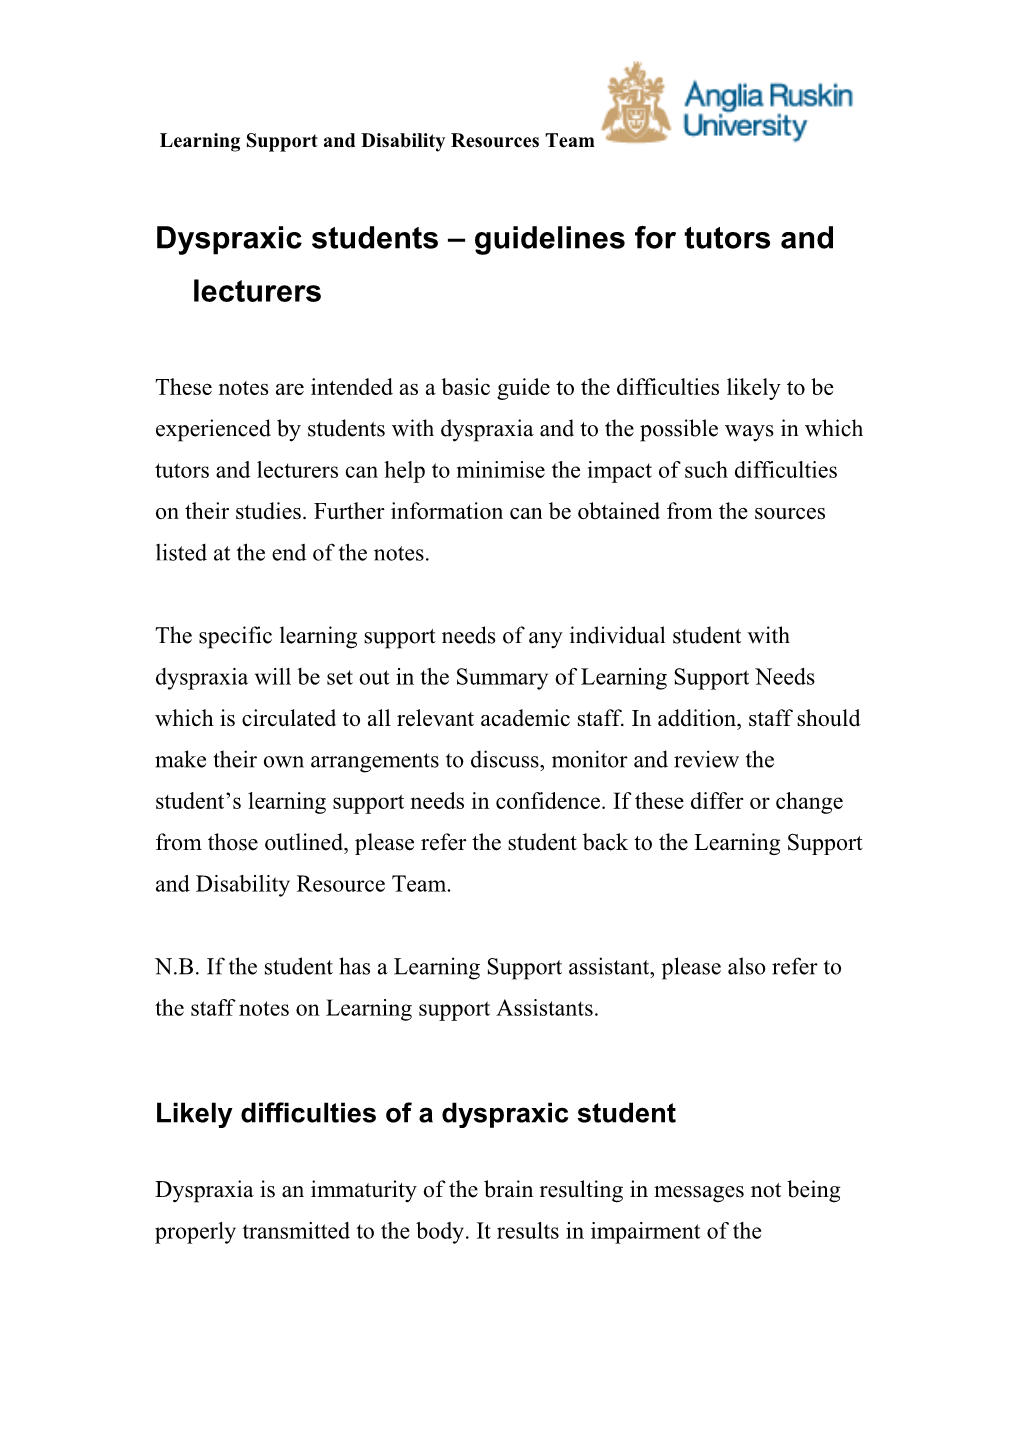 Dyspraxic Students Guidelines for Tutors and Lecturers